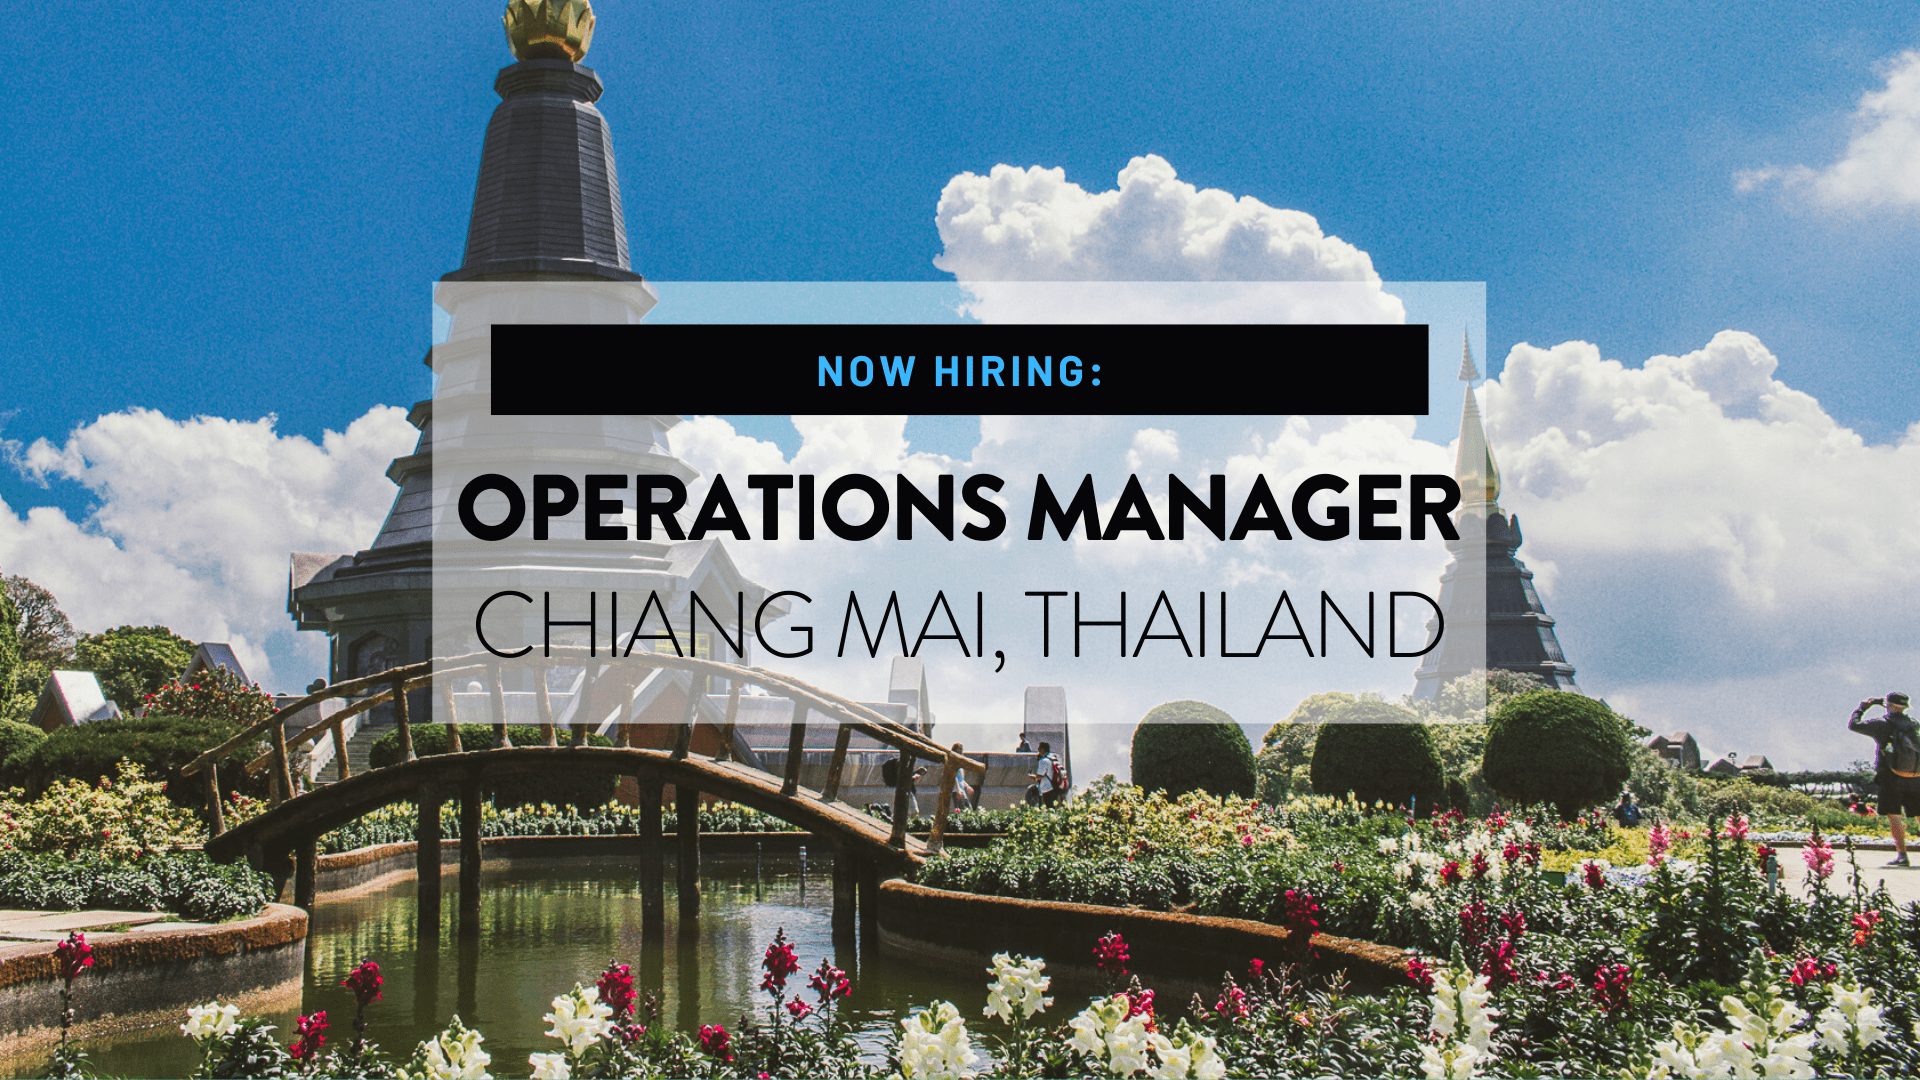 Mad Monkey Hostels Now Hiring Operations Manager for Mad Monkey Chiang Mai Thailand